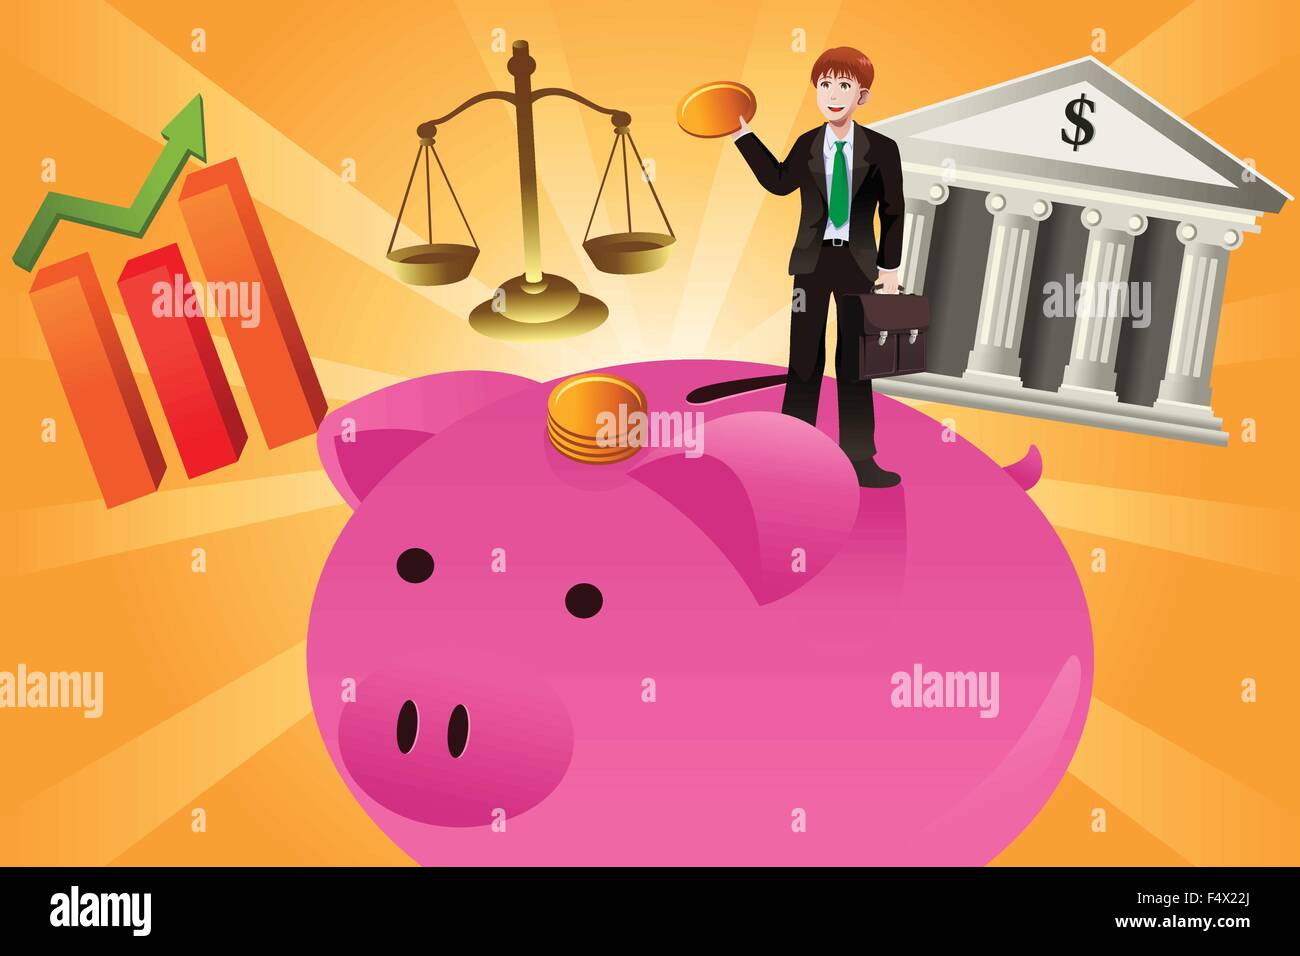 A vector illustration of businessman with financial items concept Stock Vector